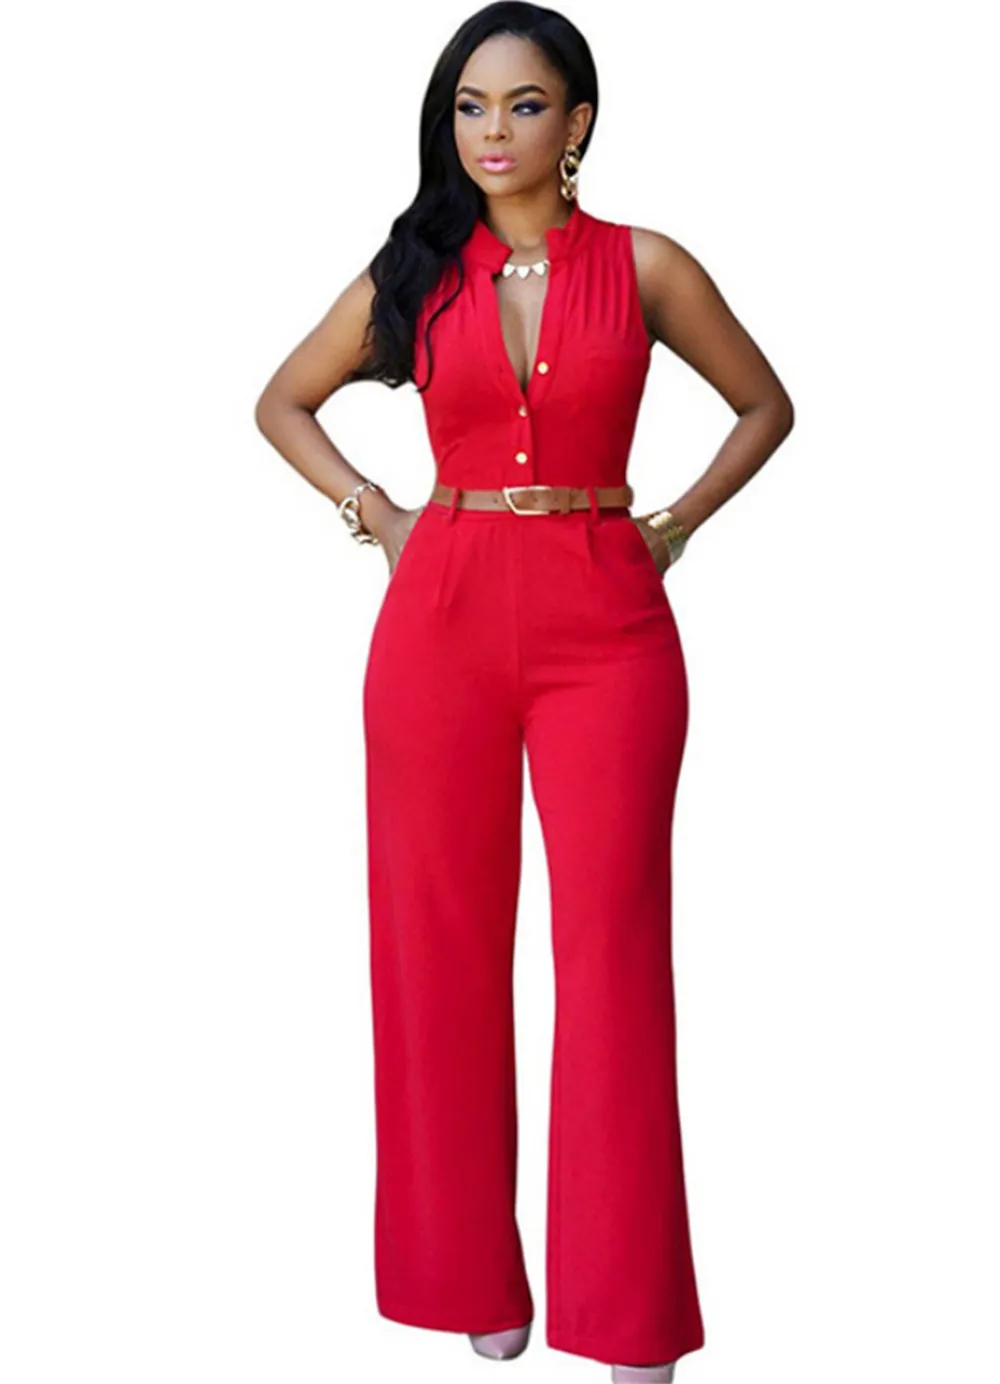 Save on Jumpsuits & Rompers - Yahoo Shopping